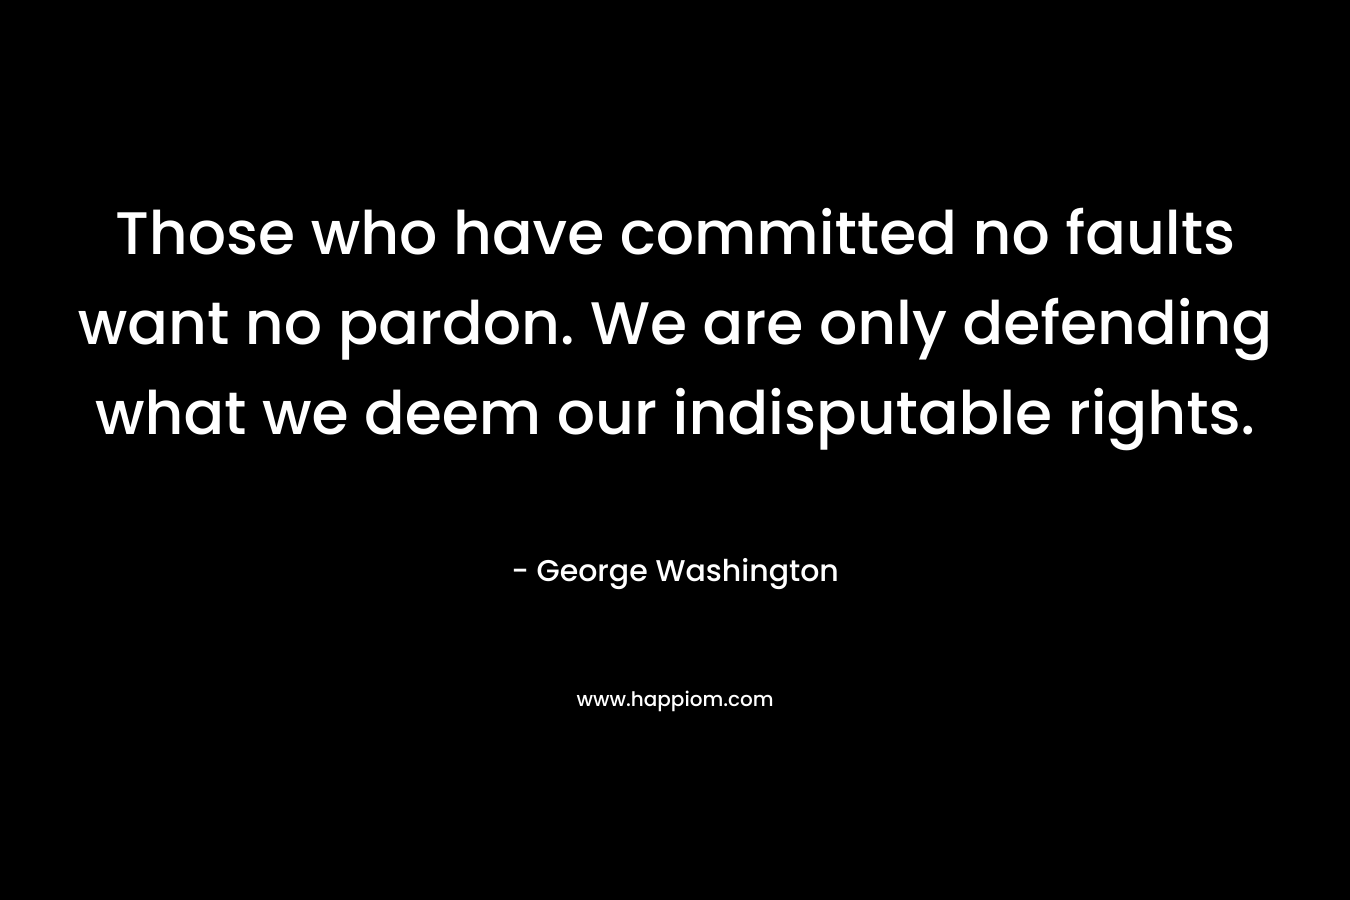 Those who have committed no faults want no pardon. We are only defending what we deem our indisputable rights. – George Washington